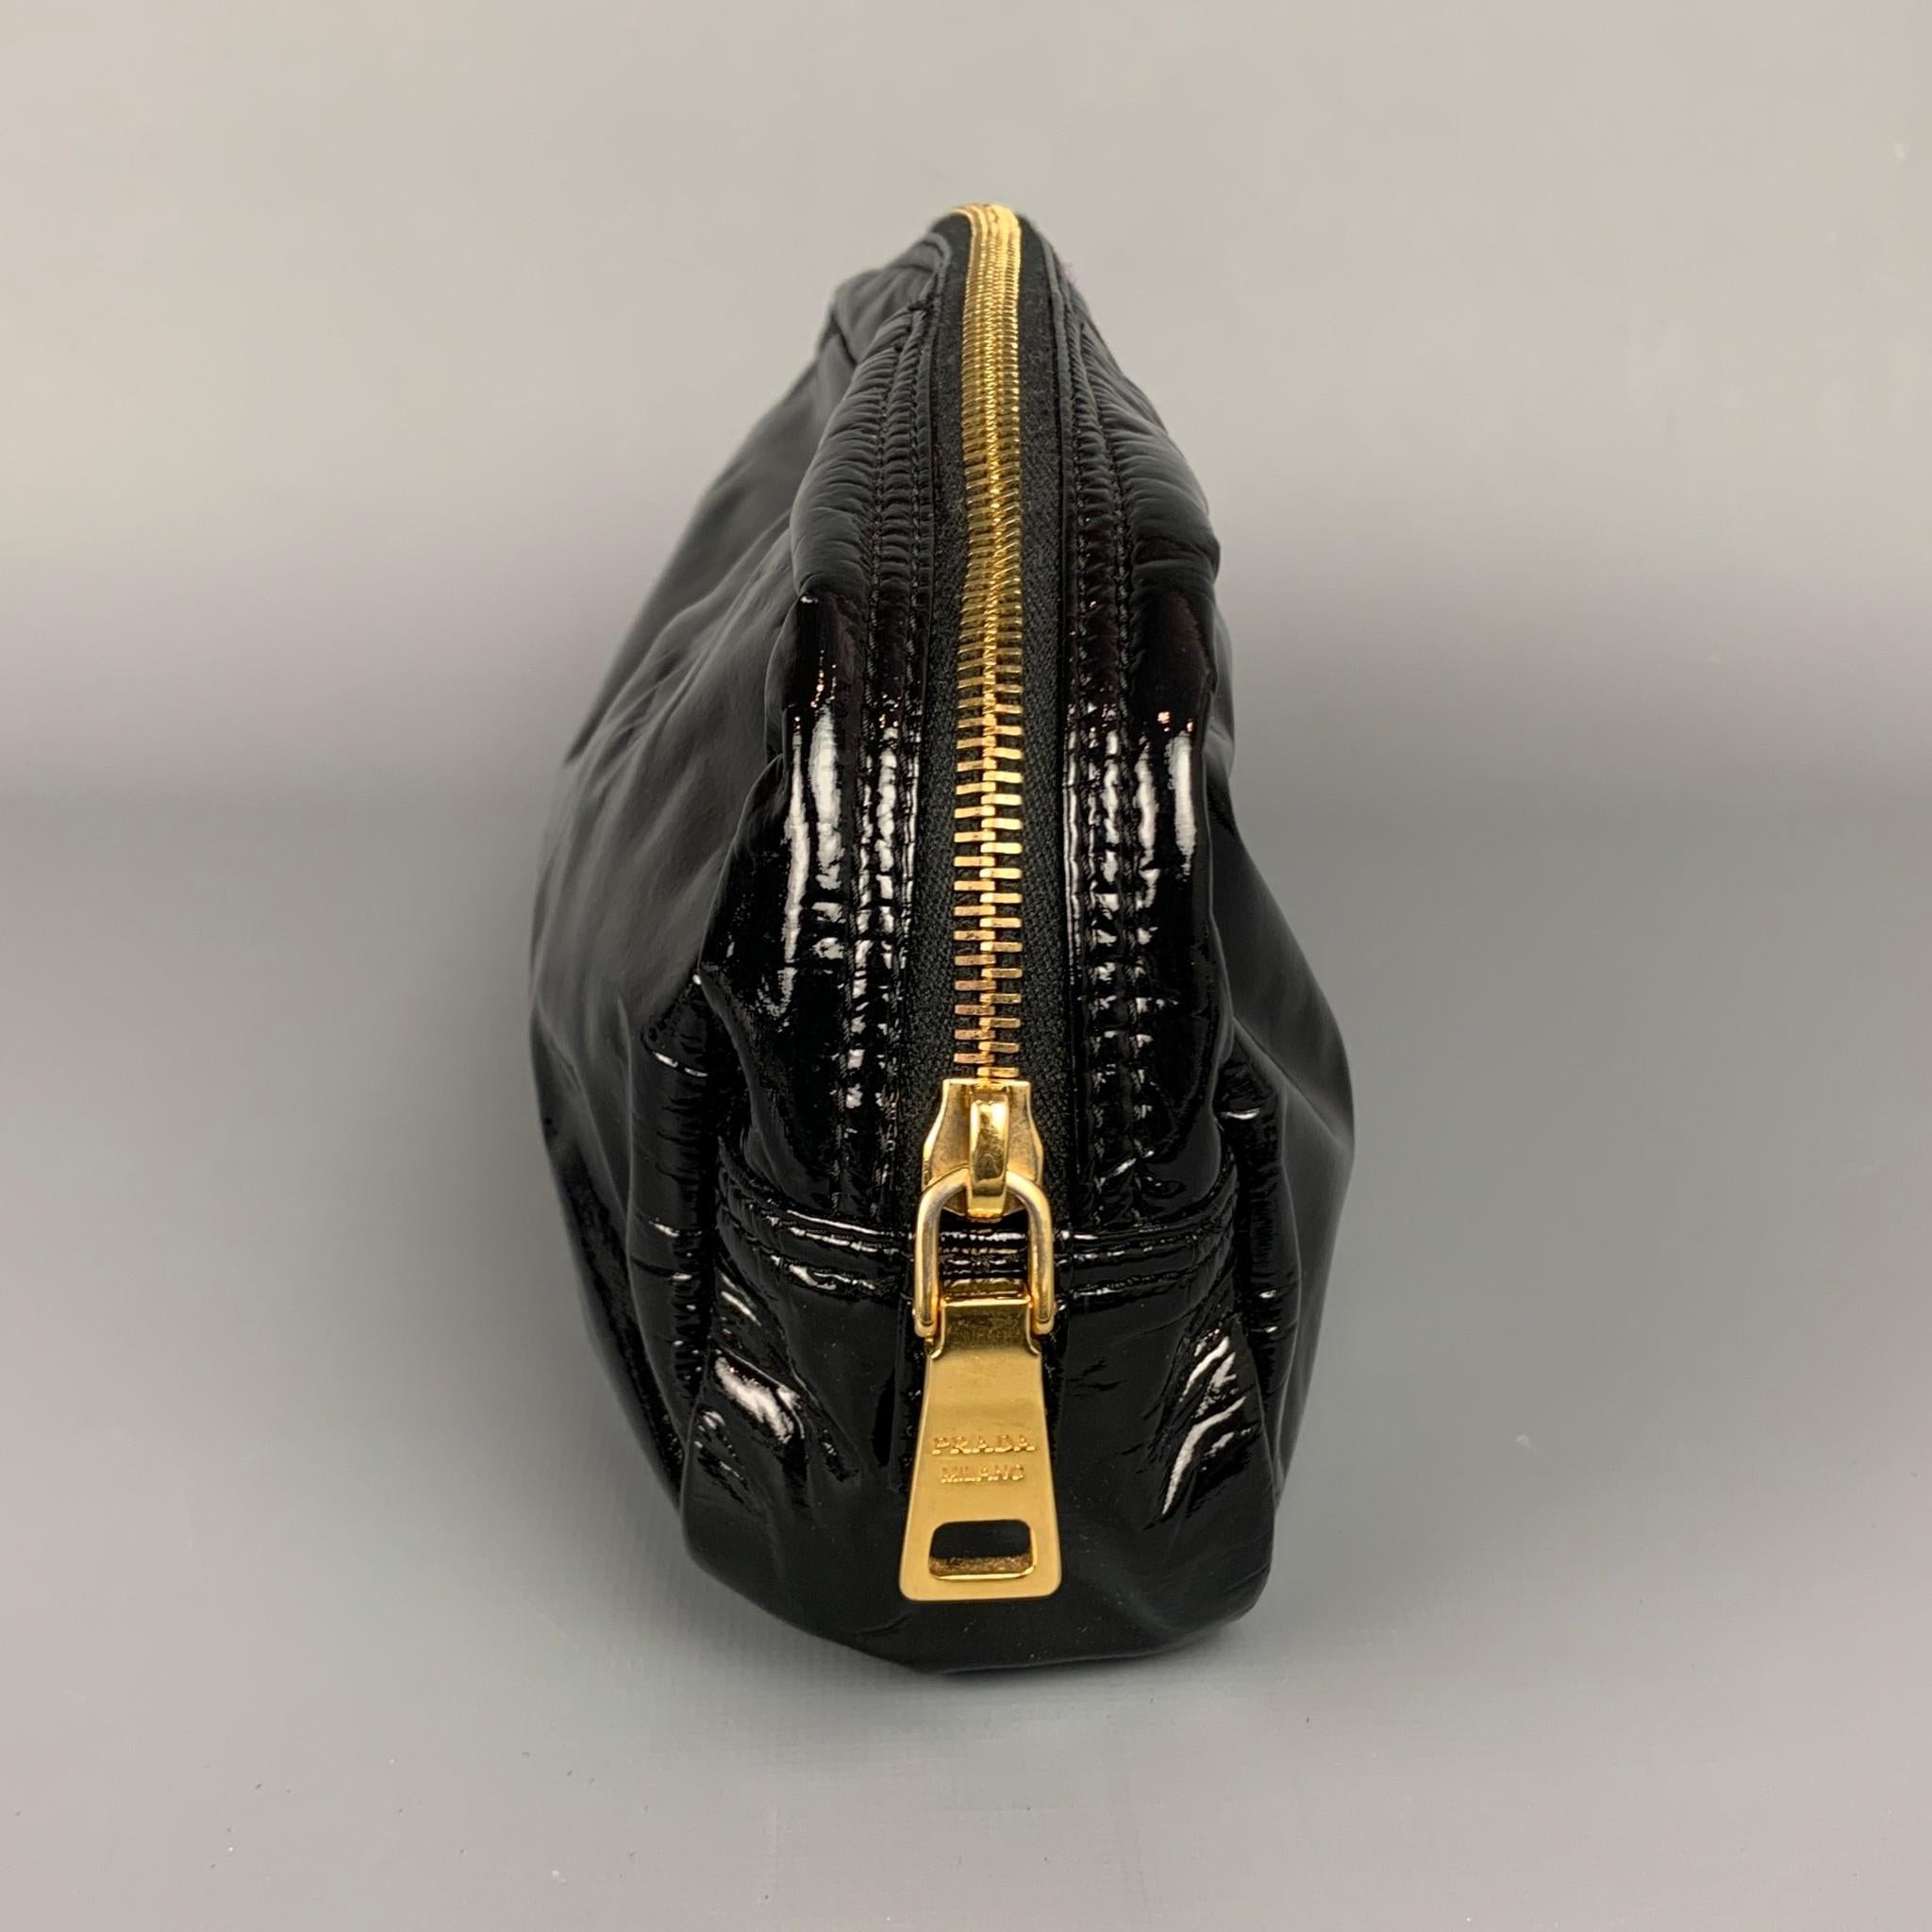 PRADA pouch comes in a black faux patent leather featuring gold tone hardware and a zipper closure. 

Very Good Pre-Owned Condition.

Measurements:

Length: 12 in.
Width: 2 in. 
Height: 4.5 in. 